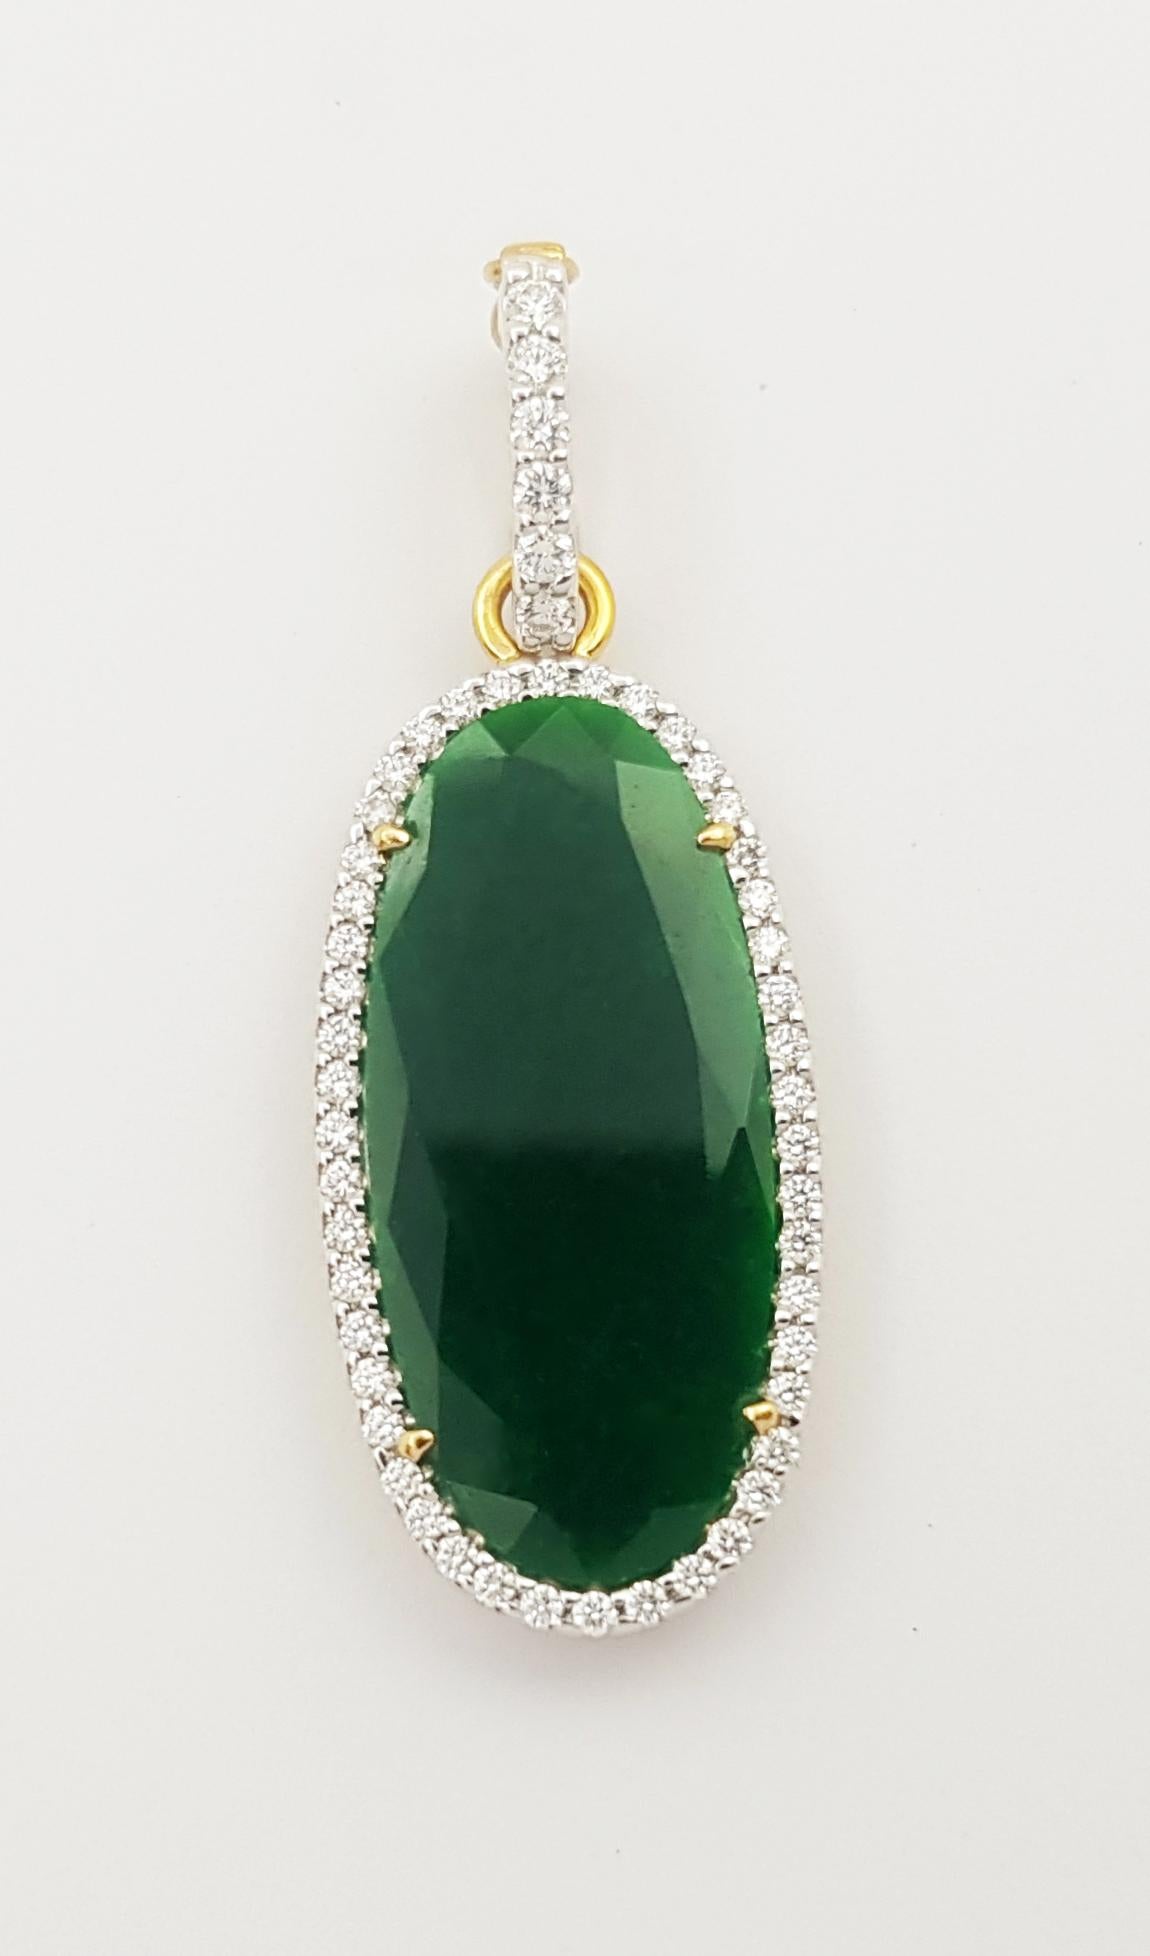 Jade 2.79 carats with Diamond 0.39 Pendant set in 18K Gold Settings
(chain not included)

Width: 1.5 cm 
Length: 4.0  cm
Total Weight: 6.08 grams

